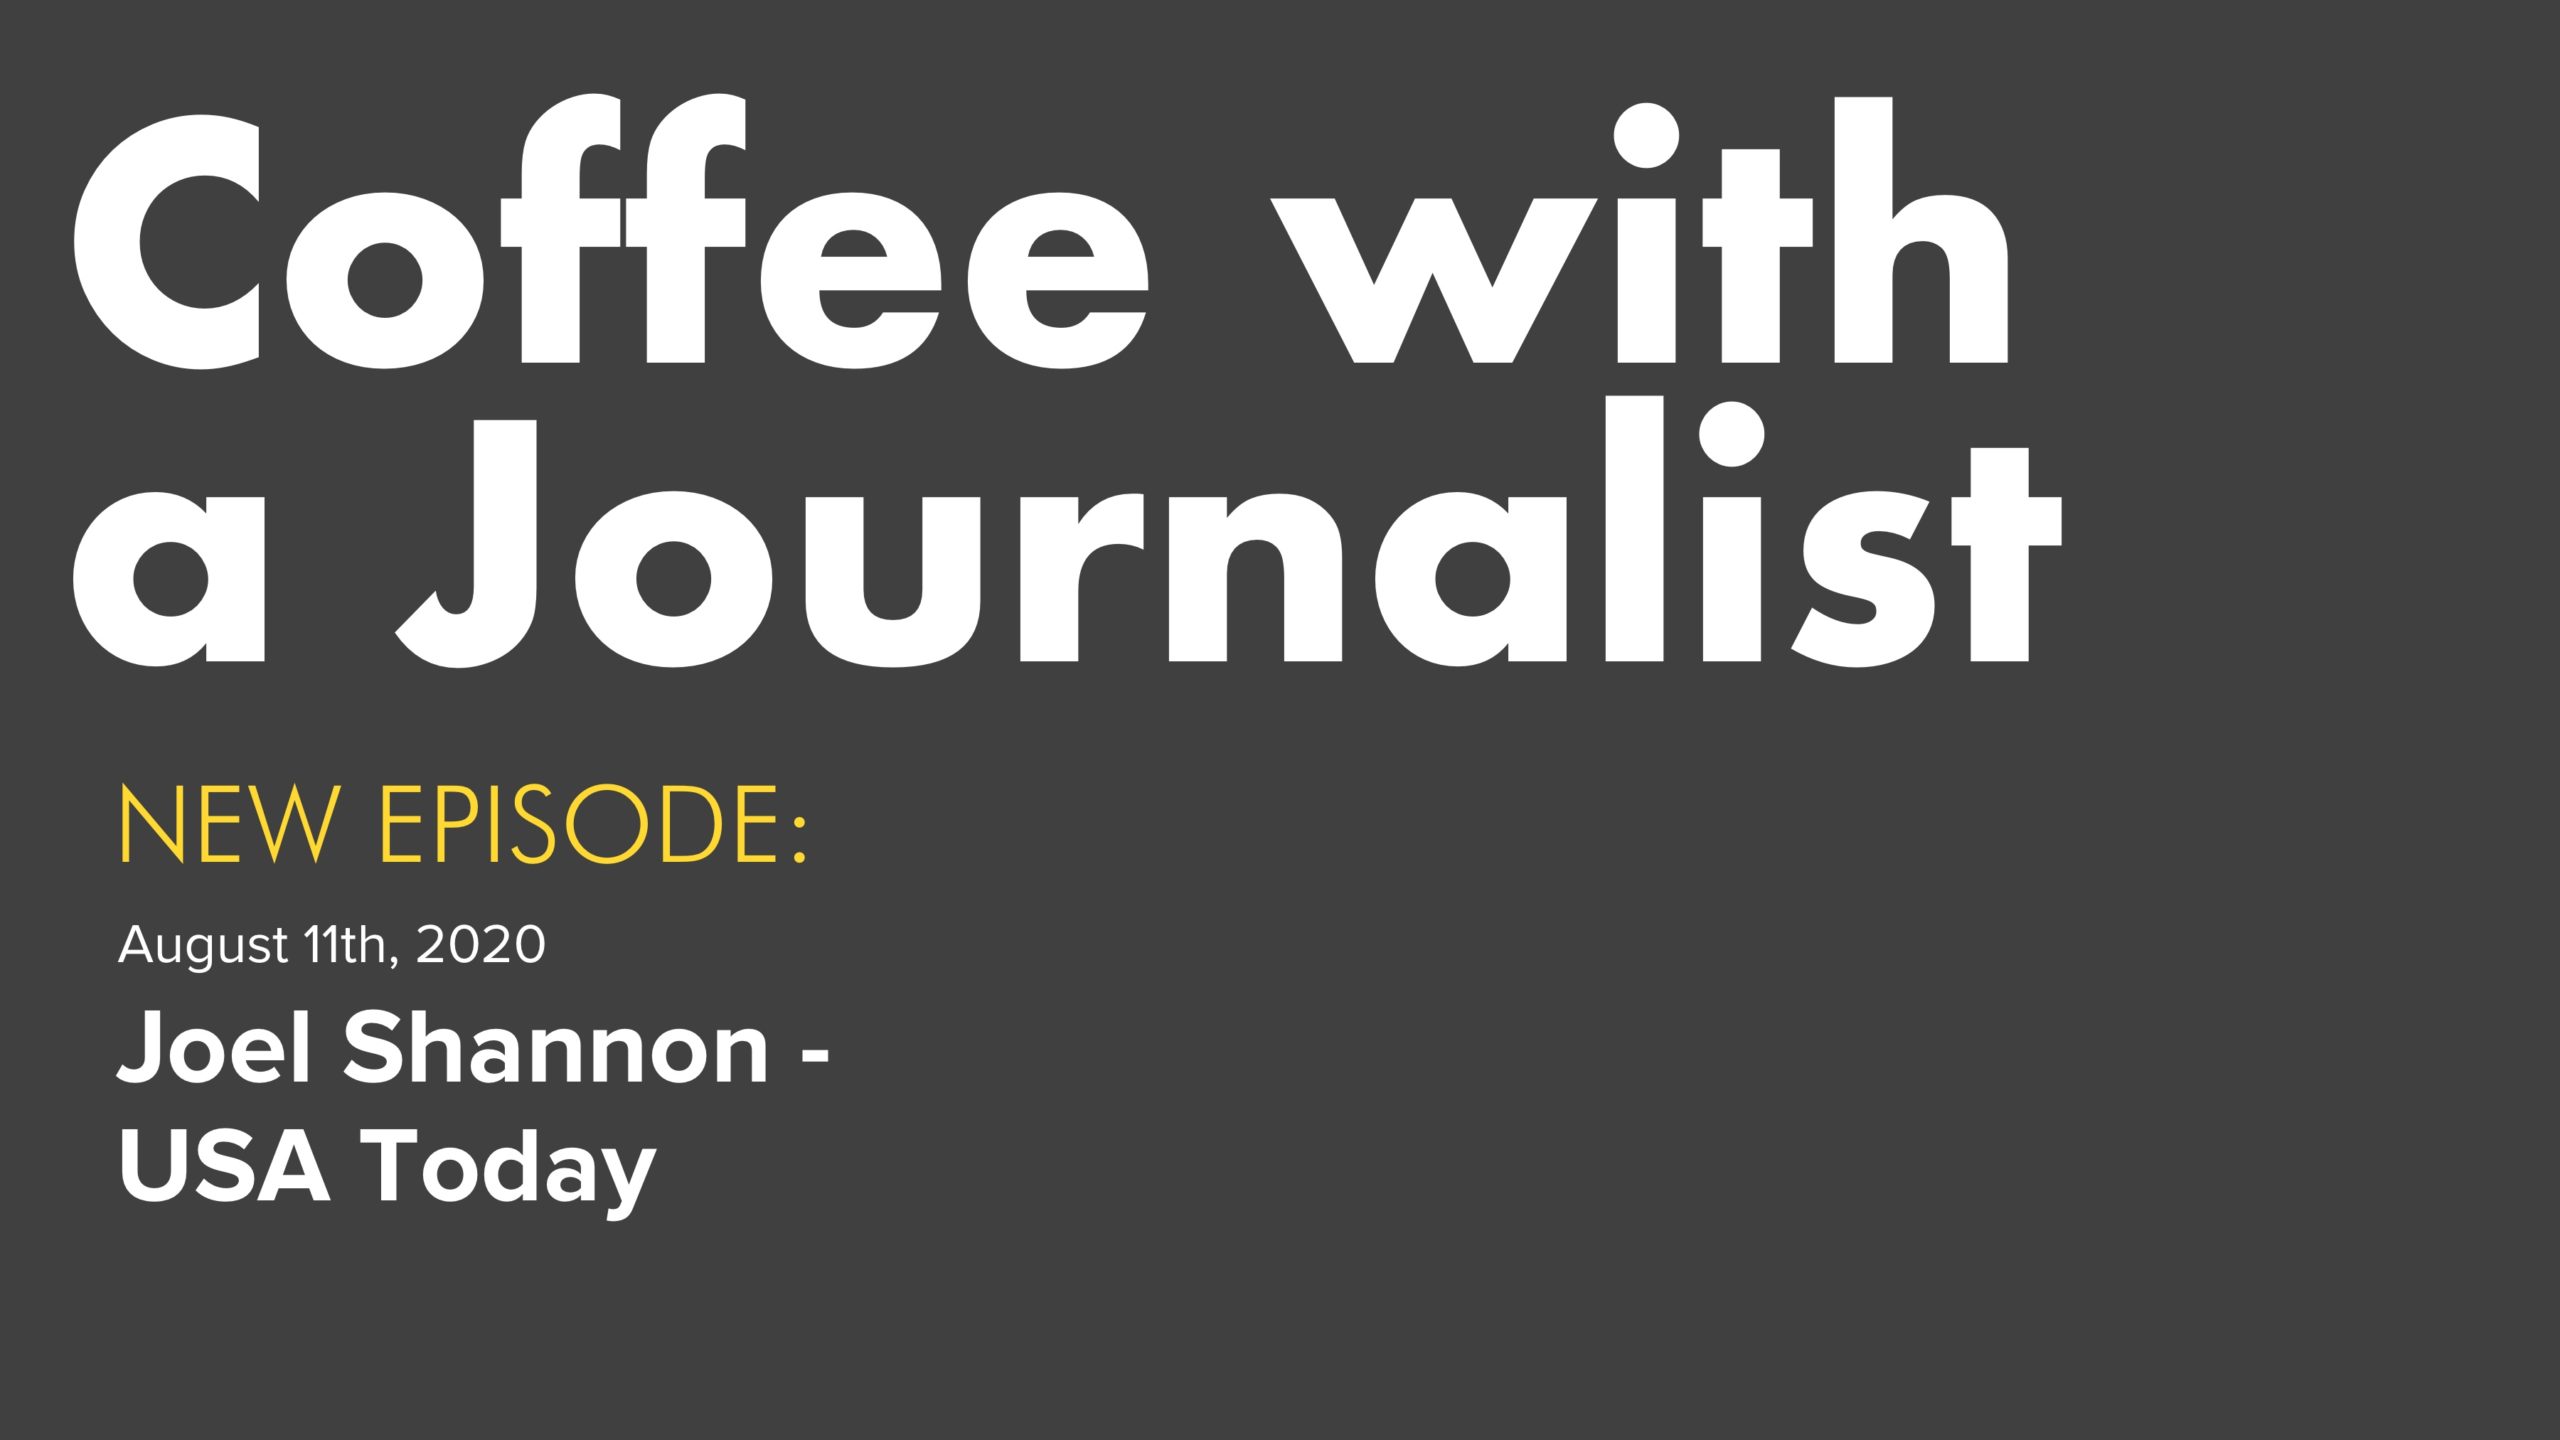 Coffee with a Journalist: Joel Shannon, USA Today